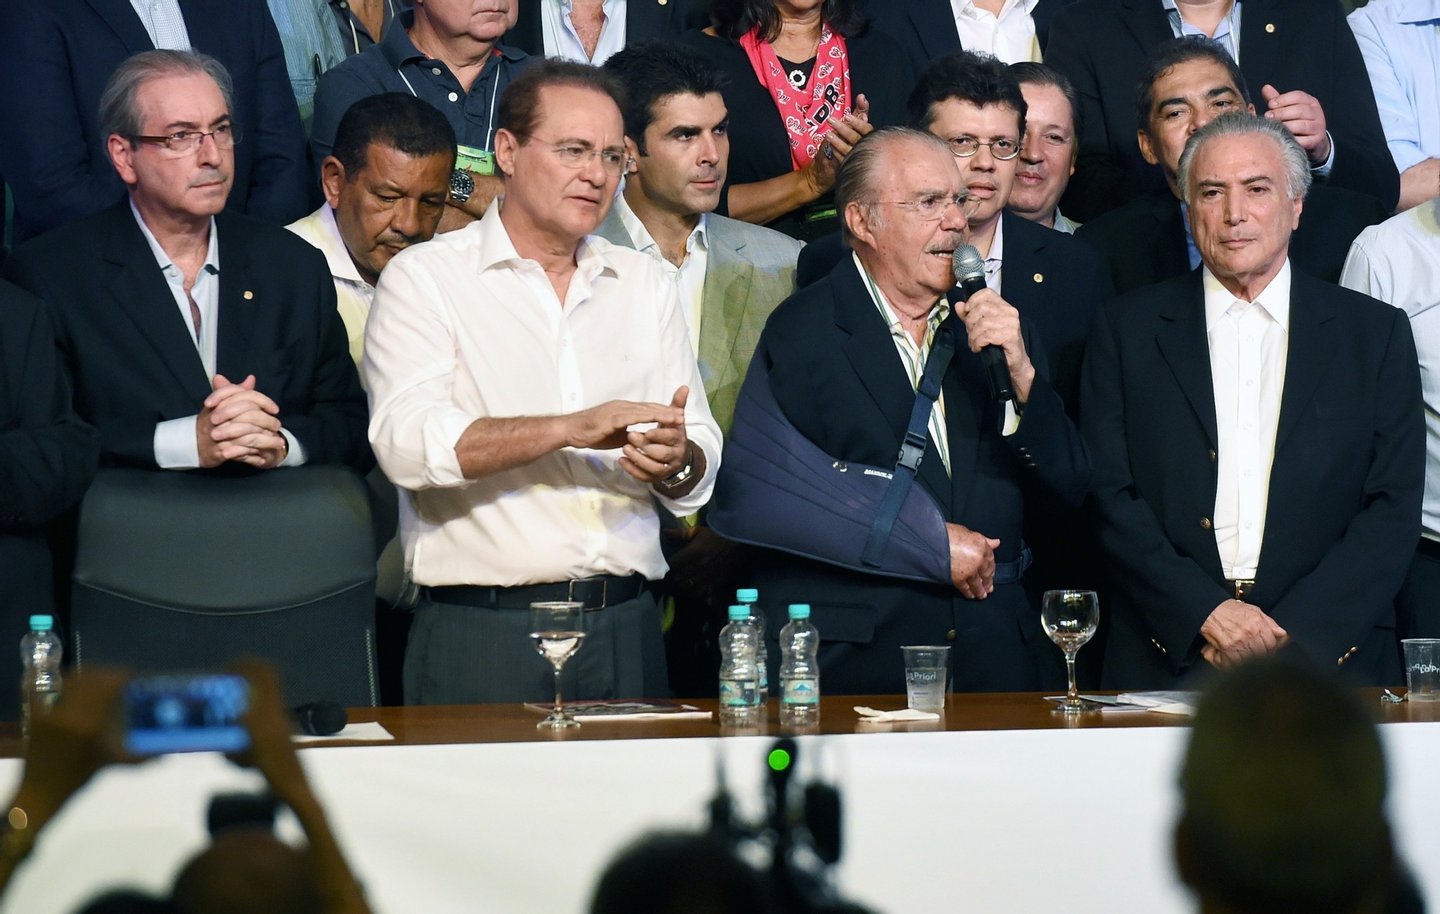 Brazilian Vice President Michel Temer (R), former President Jose Sarney (2-R), Senate President Renan Calheiros (2-L) and President of the Chamber of Deputies Eduardo Cunha (L) during the Brazilian Democratic Movement Party (PMDB) national convention in Brasilia, on March 12, 2016. The PMDB convention will discuss if they continue supporting the government or if they will back the impeachment of President Dilma Rousseff in Congress. AFP PHOTO/EVARISTO SA / AFP / EVARISTO SA (Photo credit should read EVARISTO SA/AFP/Getty Images)